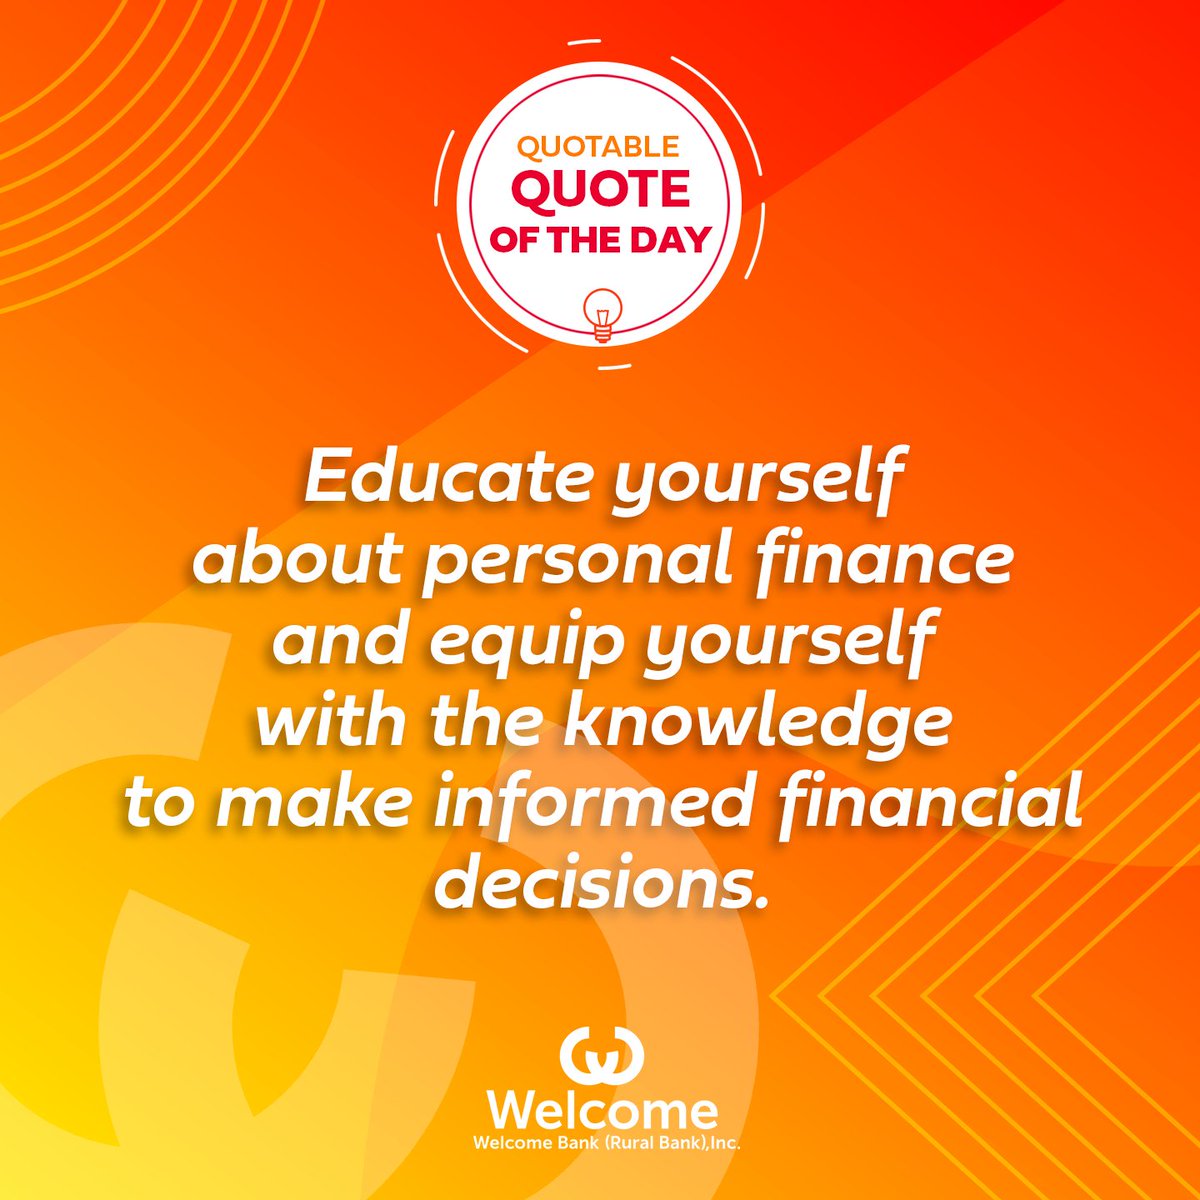 Happy Monday! ✨ Educate yourself with knowledge about personal finance and learn to take charge of your financial future. 🌟

#WelcomeBank #FinancialAdvice